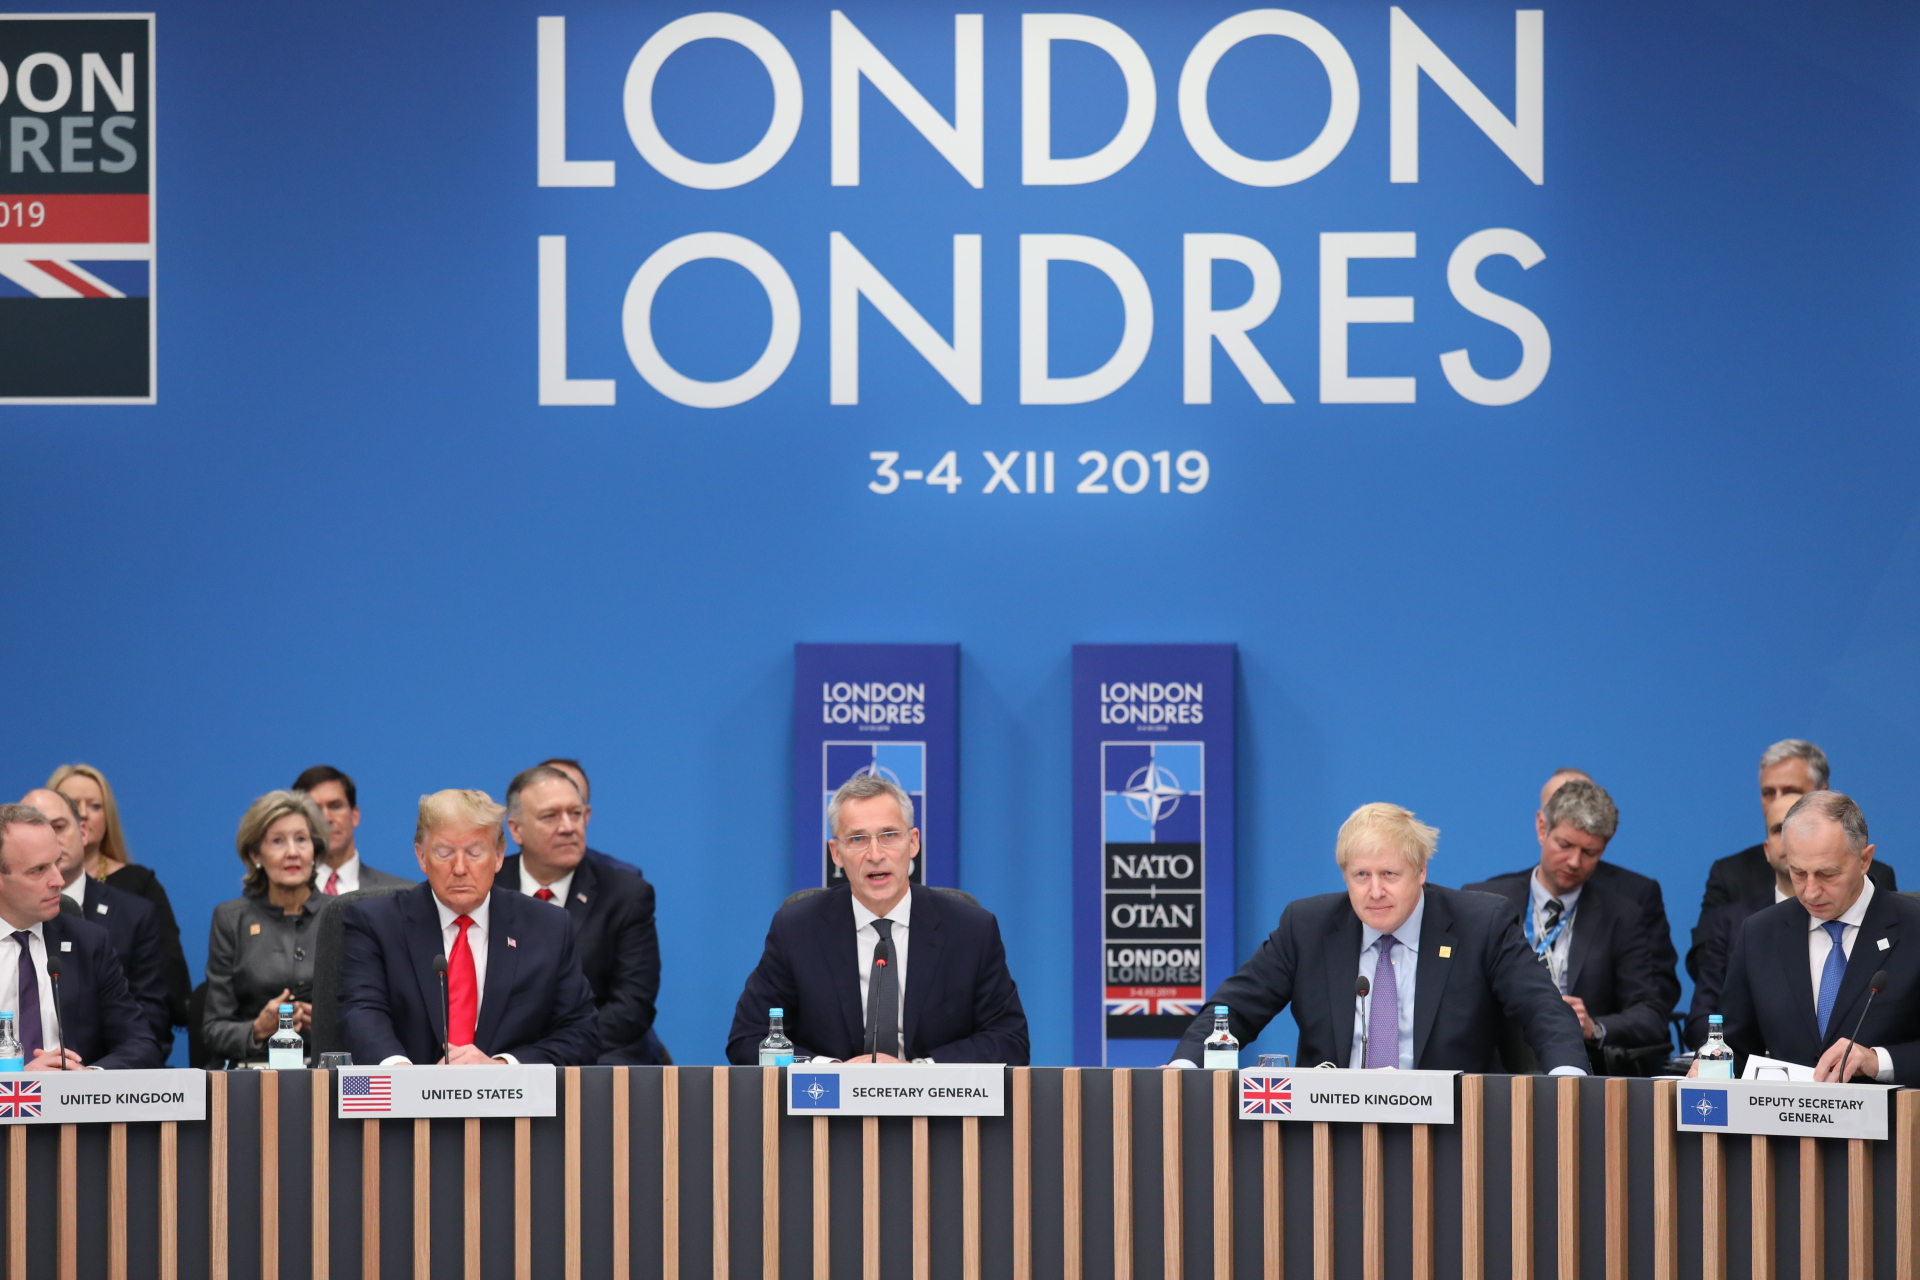 Secretary General of NATO, Jens Stoltenberg with Prime Minister Boris Johnson and President Donald Trump in 2019 (Image courtesy of Number 10)